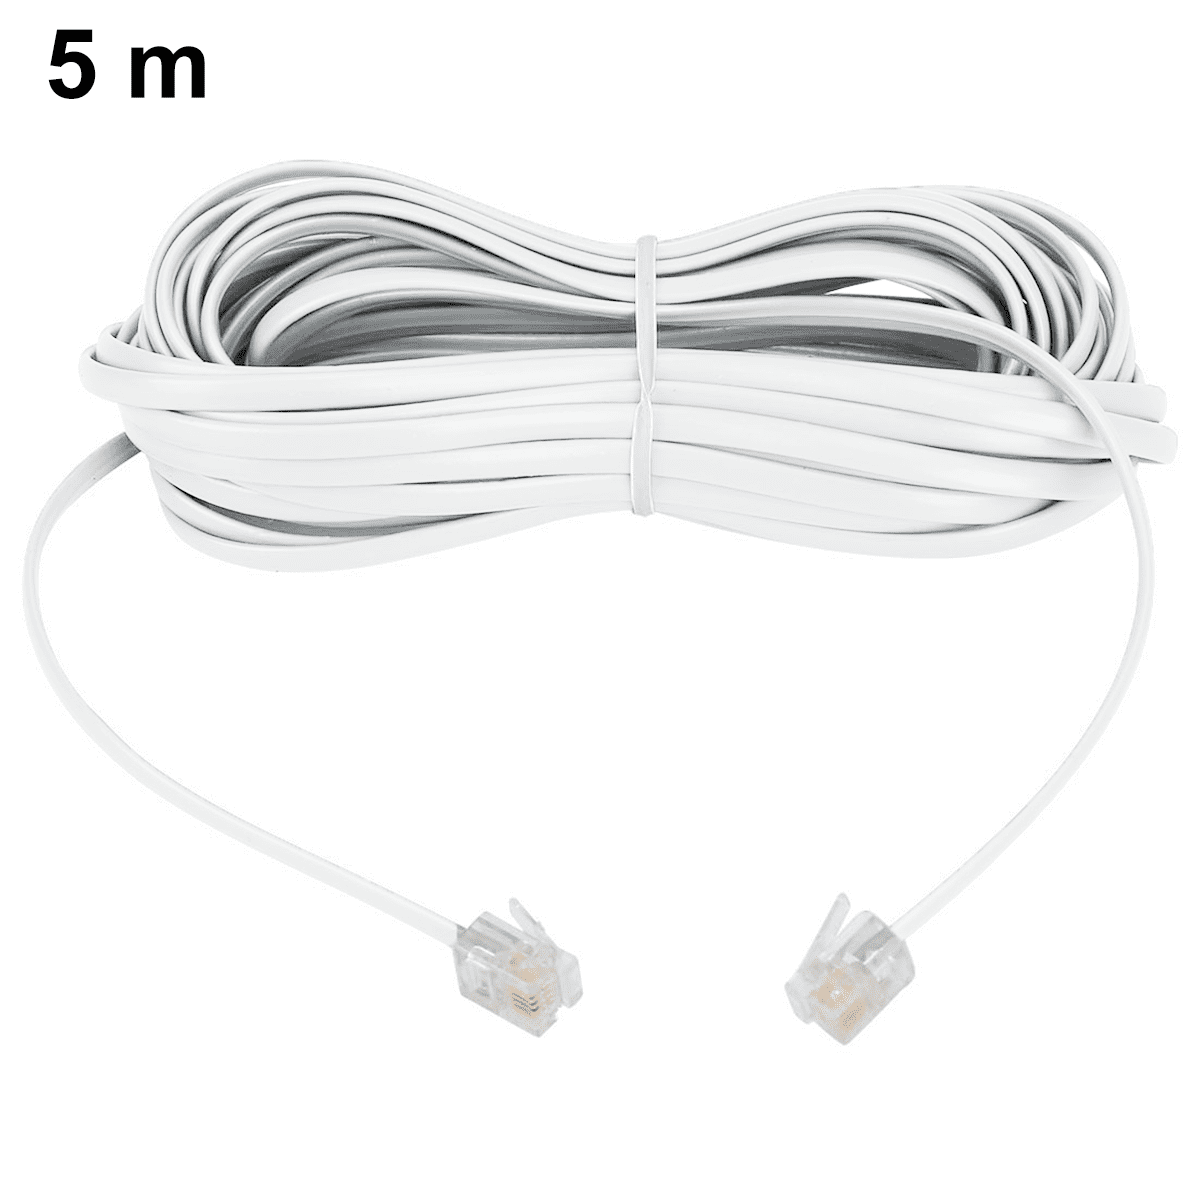 25FT Feet RJ11 4C Modular Telephone Extension Phone Cord Cable Line Wire 5 LOT 